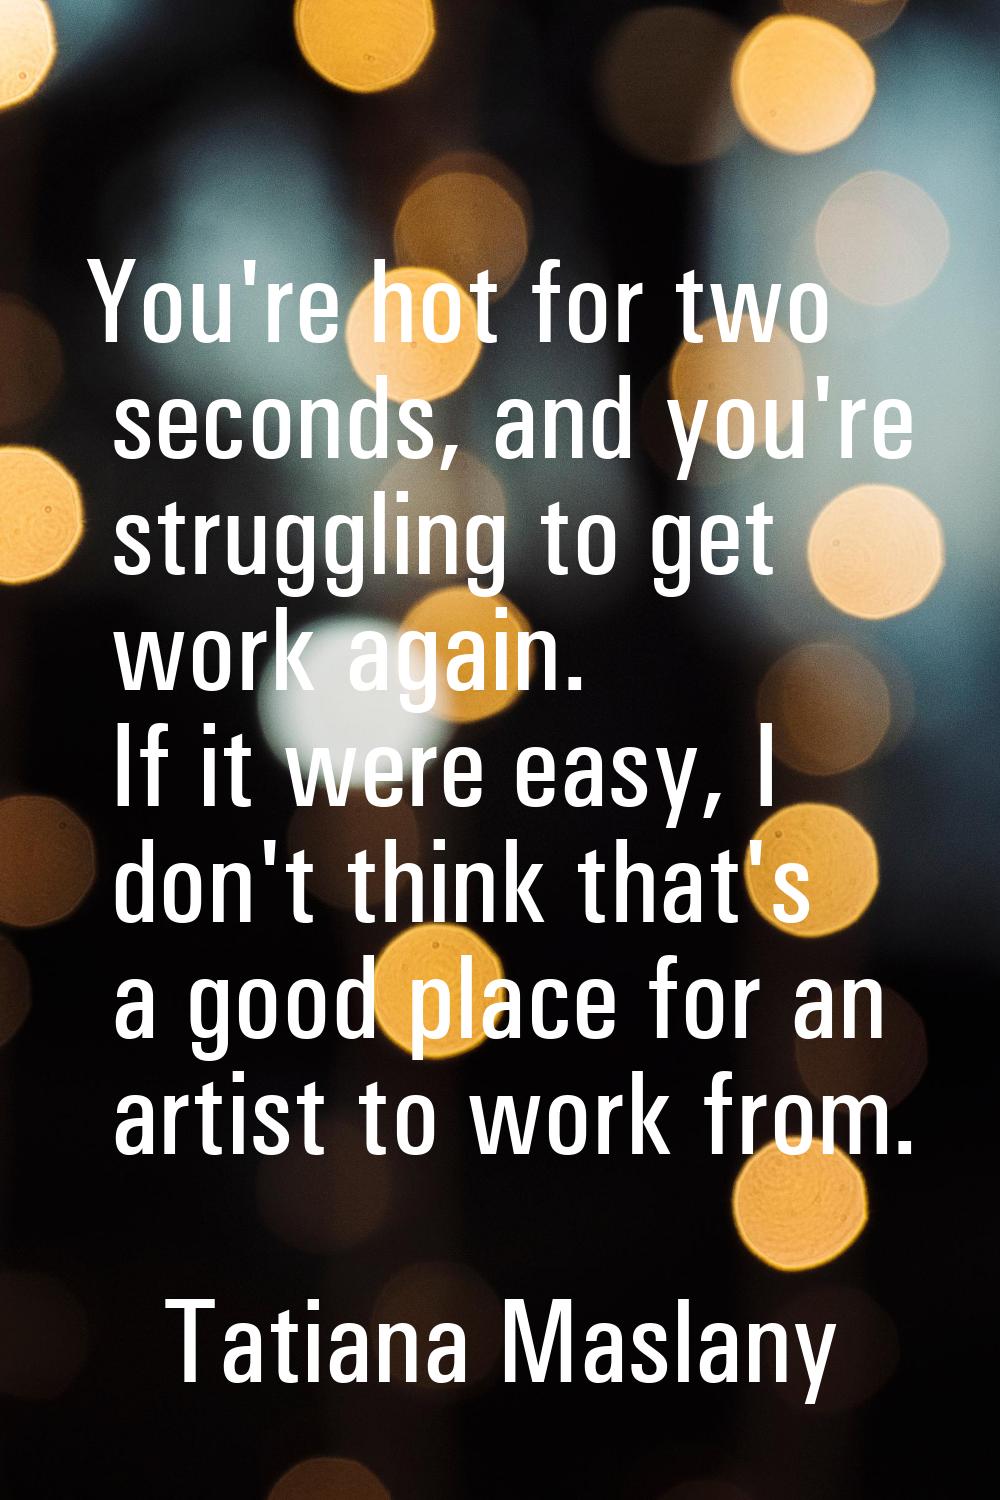 You're hot for two seconds, and you're struggling to get work again. If it were easy, I don't think